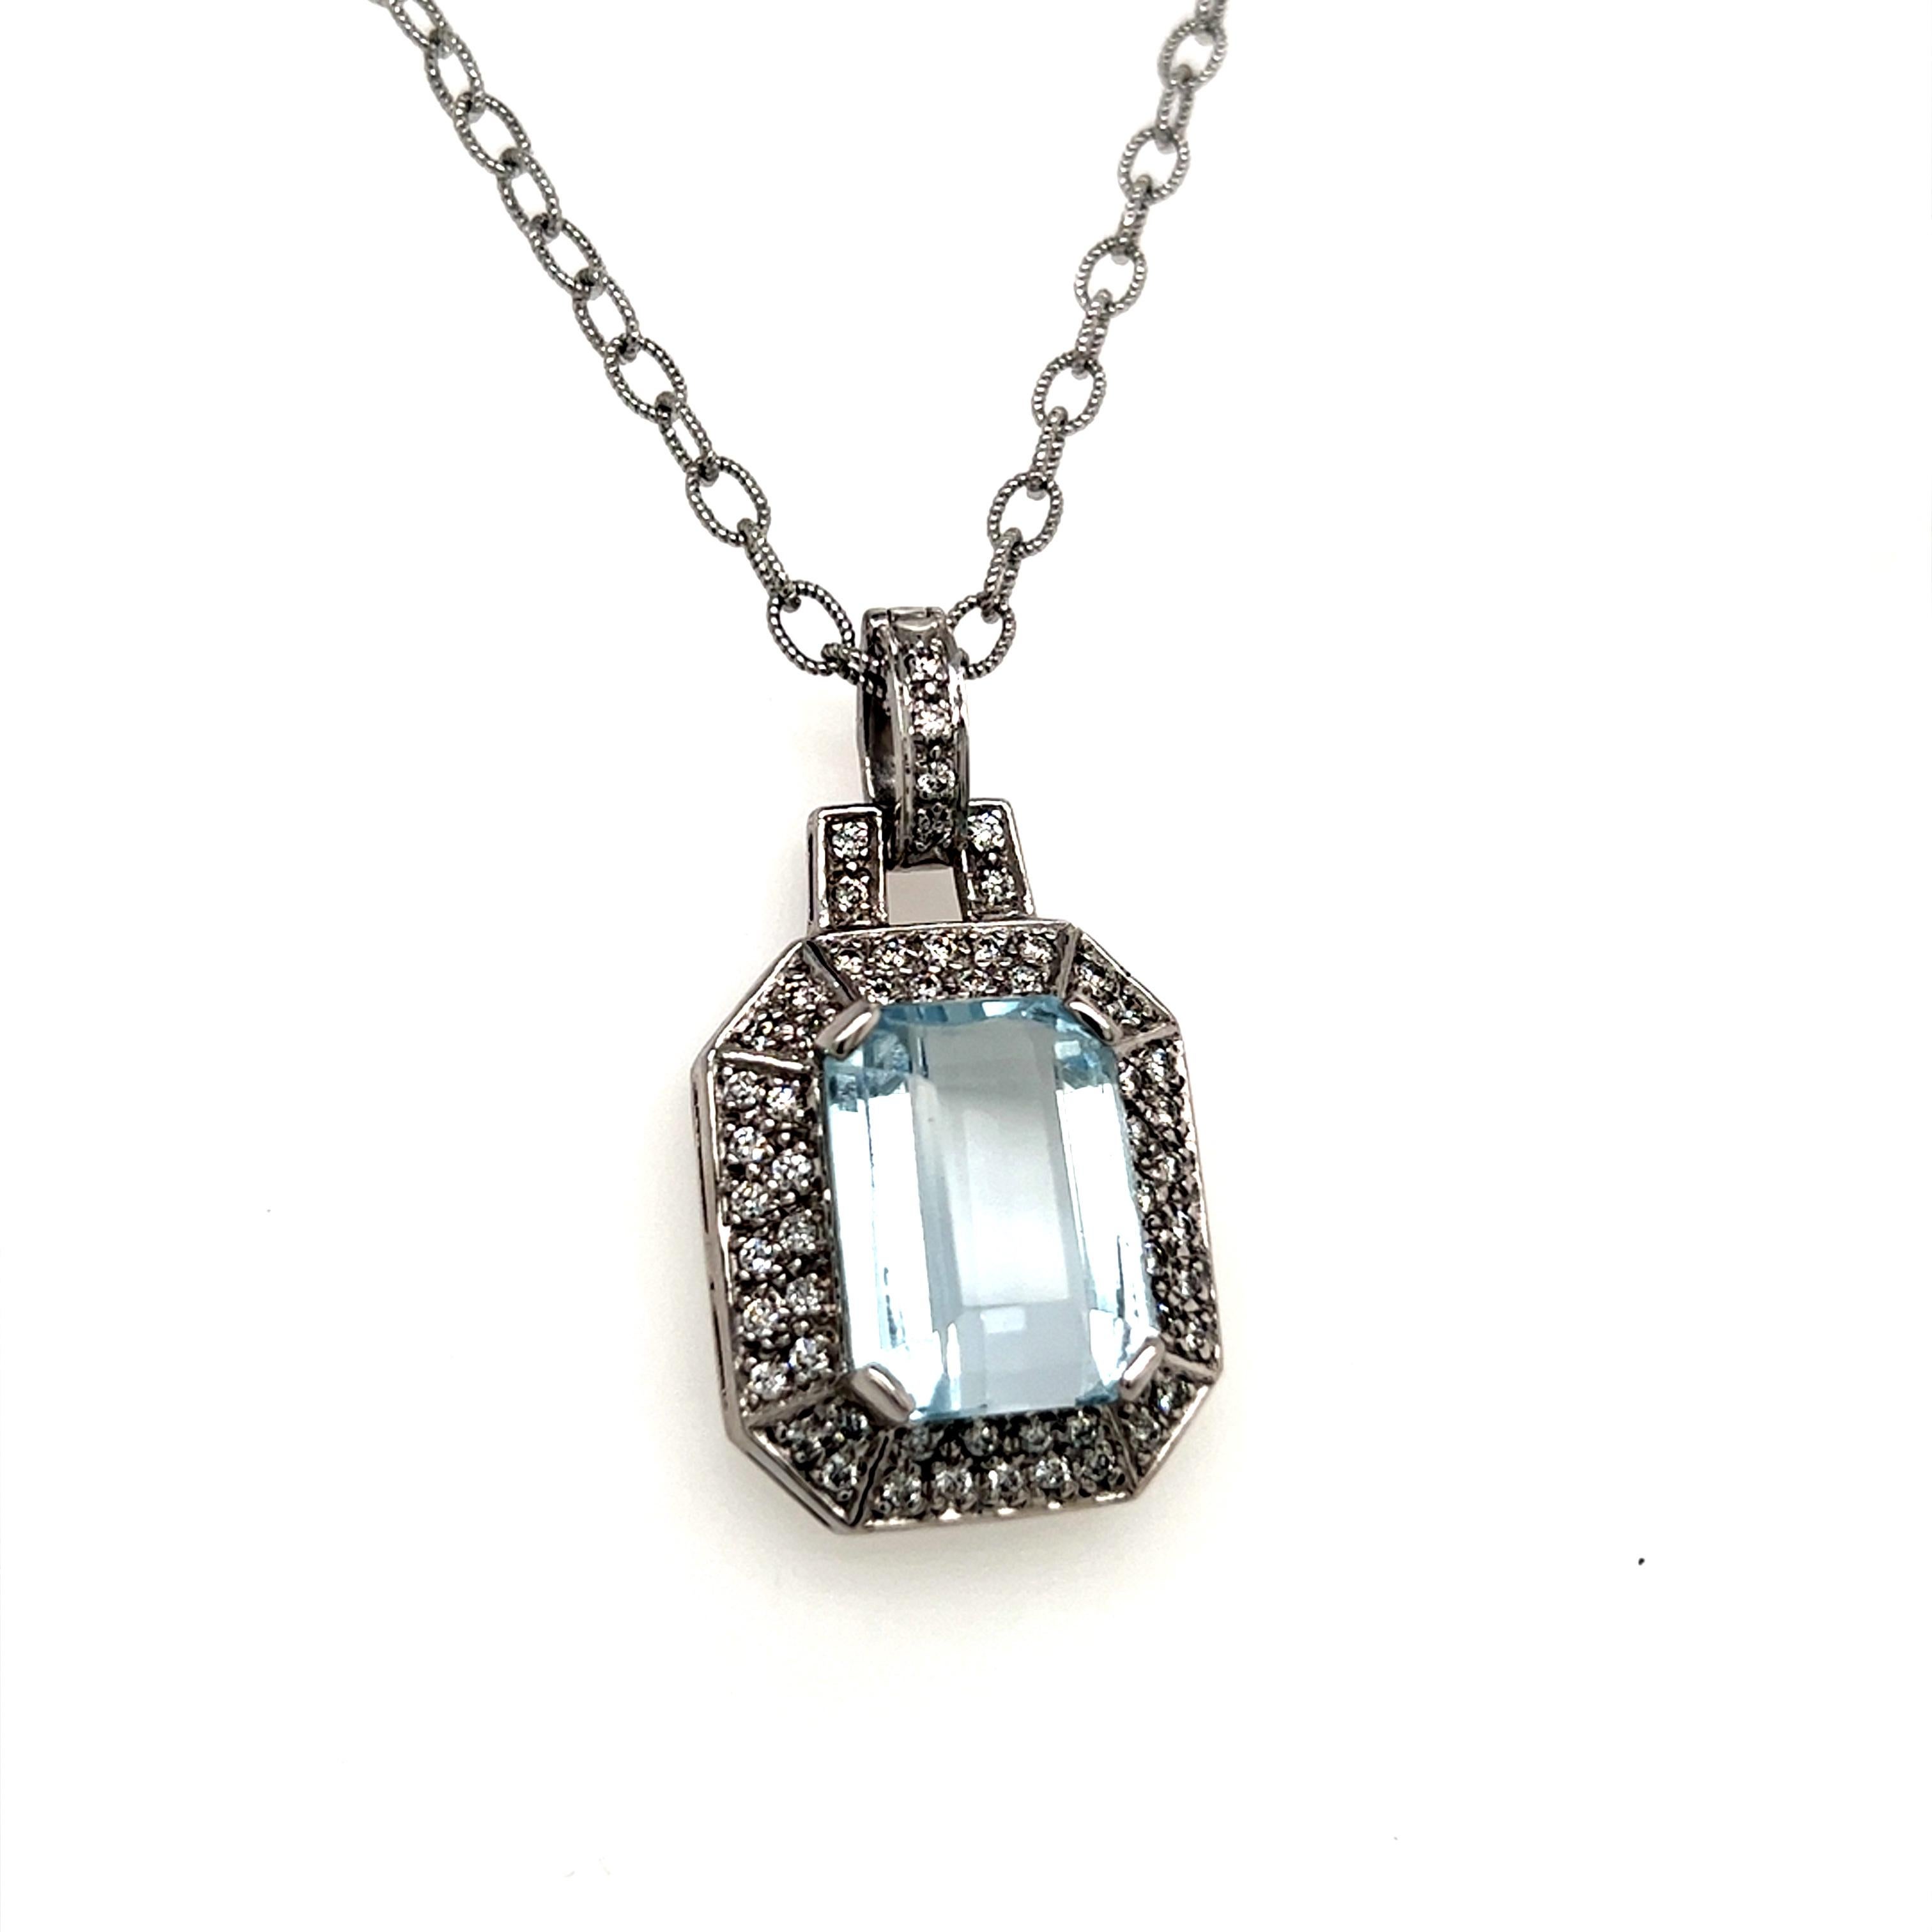 Natural Aquamarine Diamond Necklace 14k Gold 10.45 TCW Certified $9,520 211196

MADE IN ITALY

Very Versatile With Removable Bail to use with Pearls or Another Necklace!

Nothing says, “I Love you” more than Diamonds and Pearls!

This Aquamarine